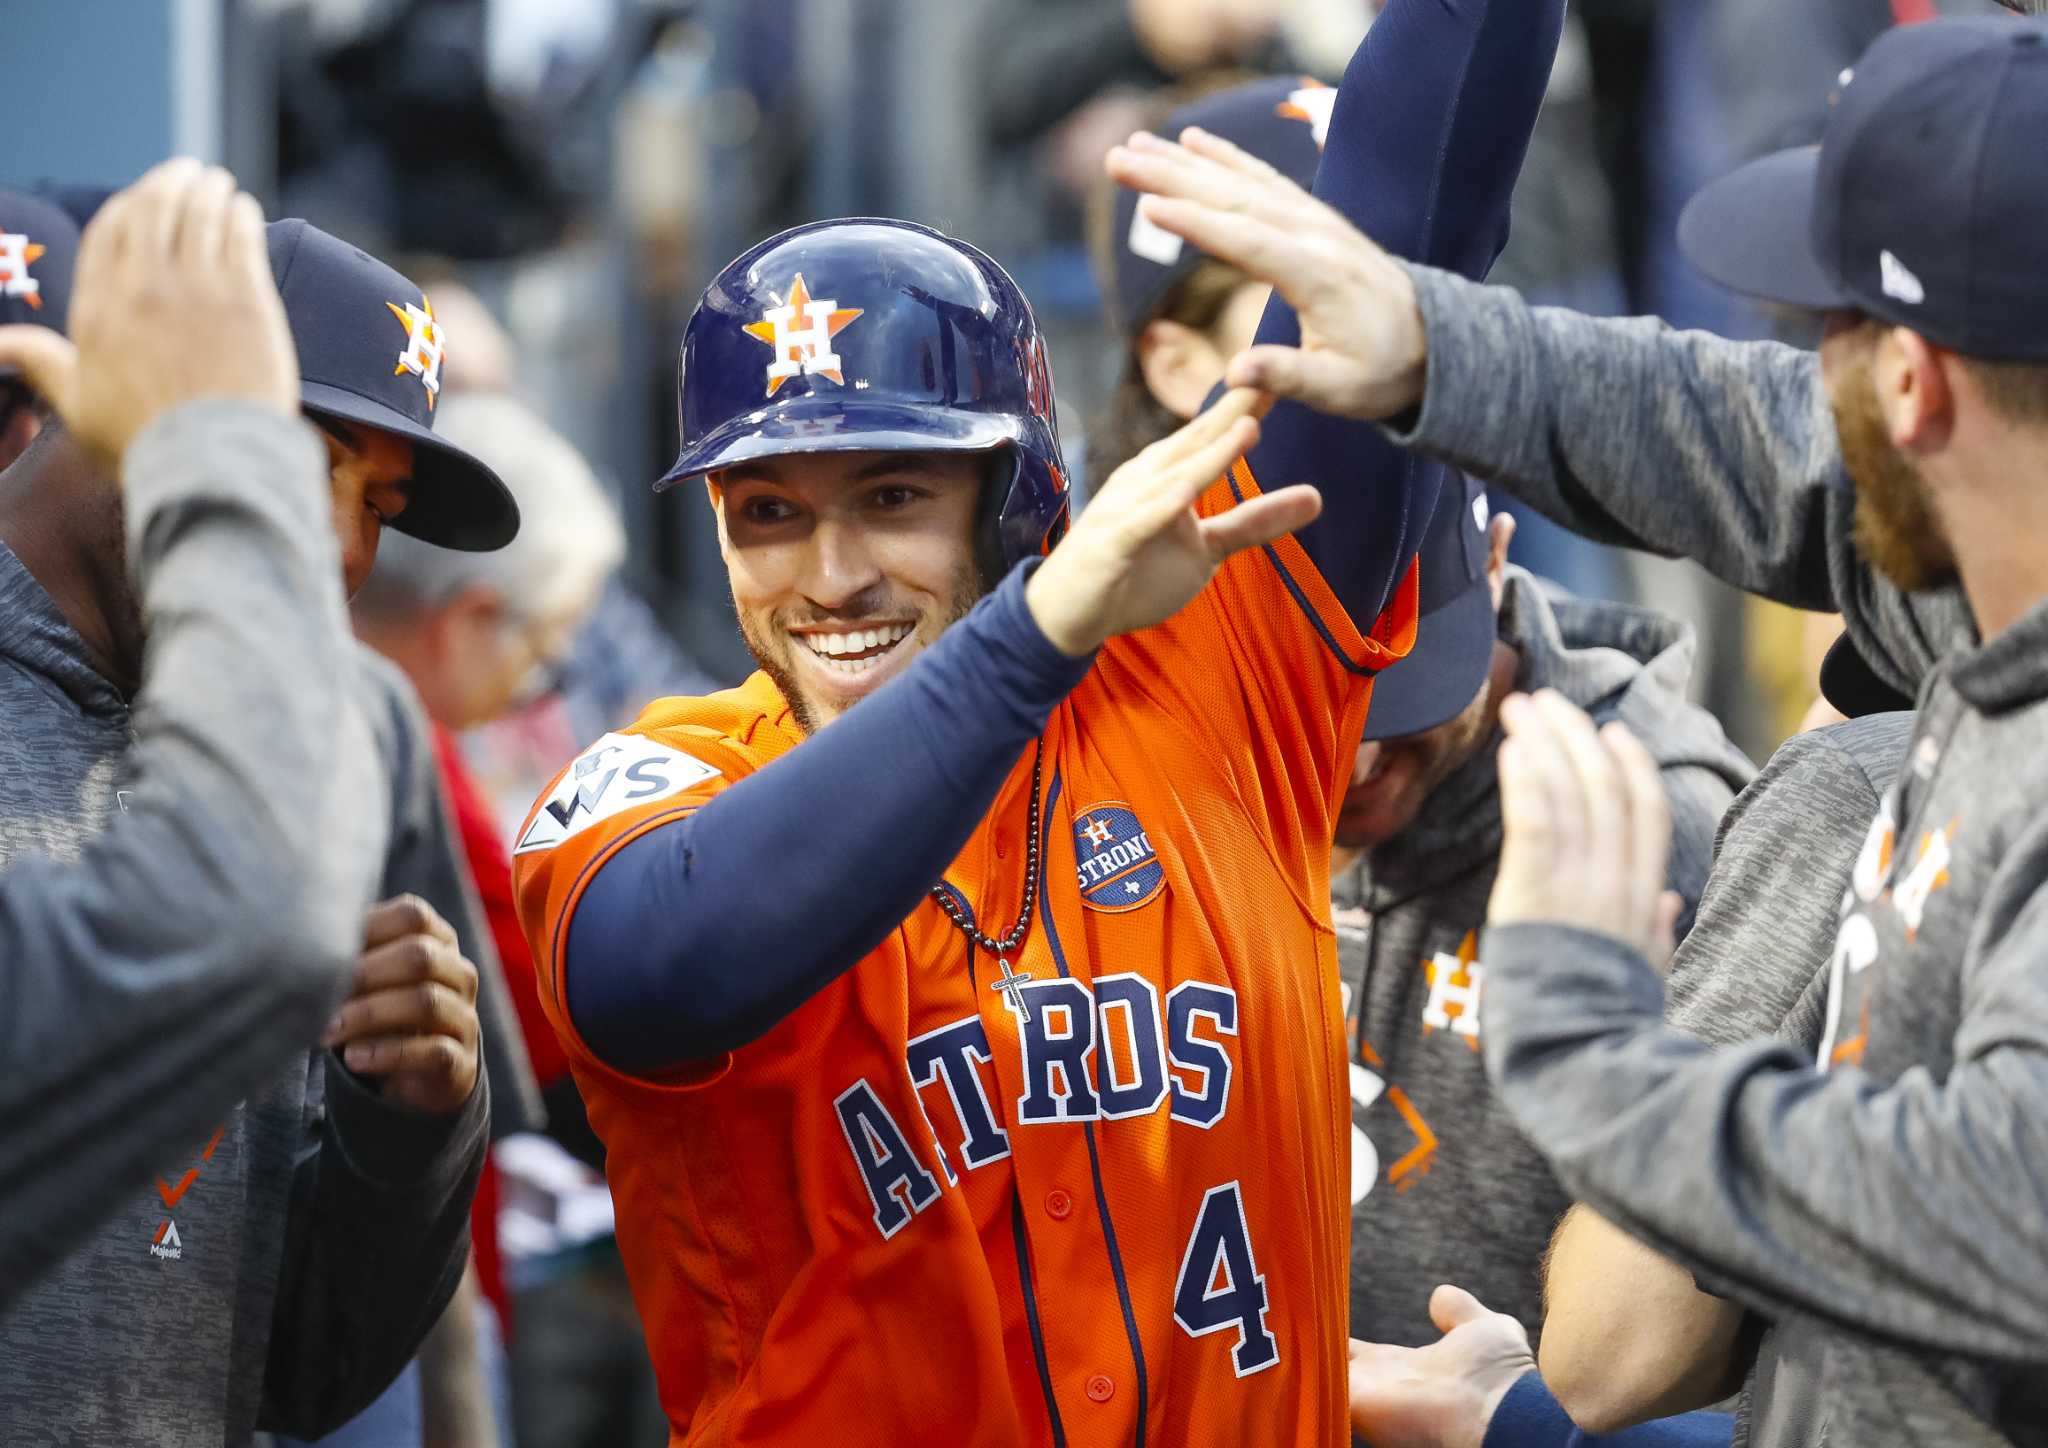 MLB All-Star Game 2014: Jose Altuve's All-Star Astro-ness - The